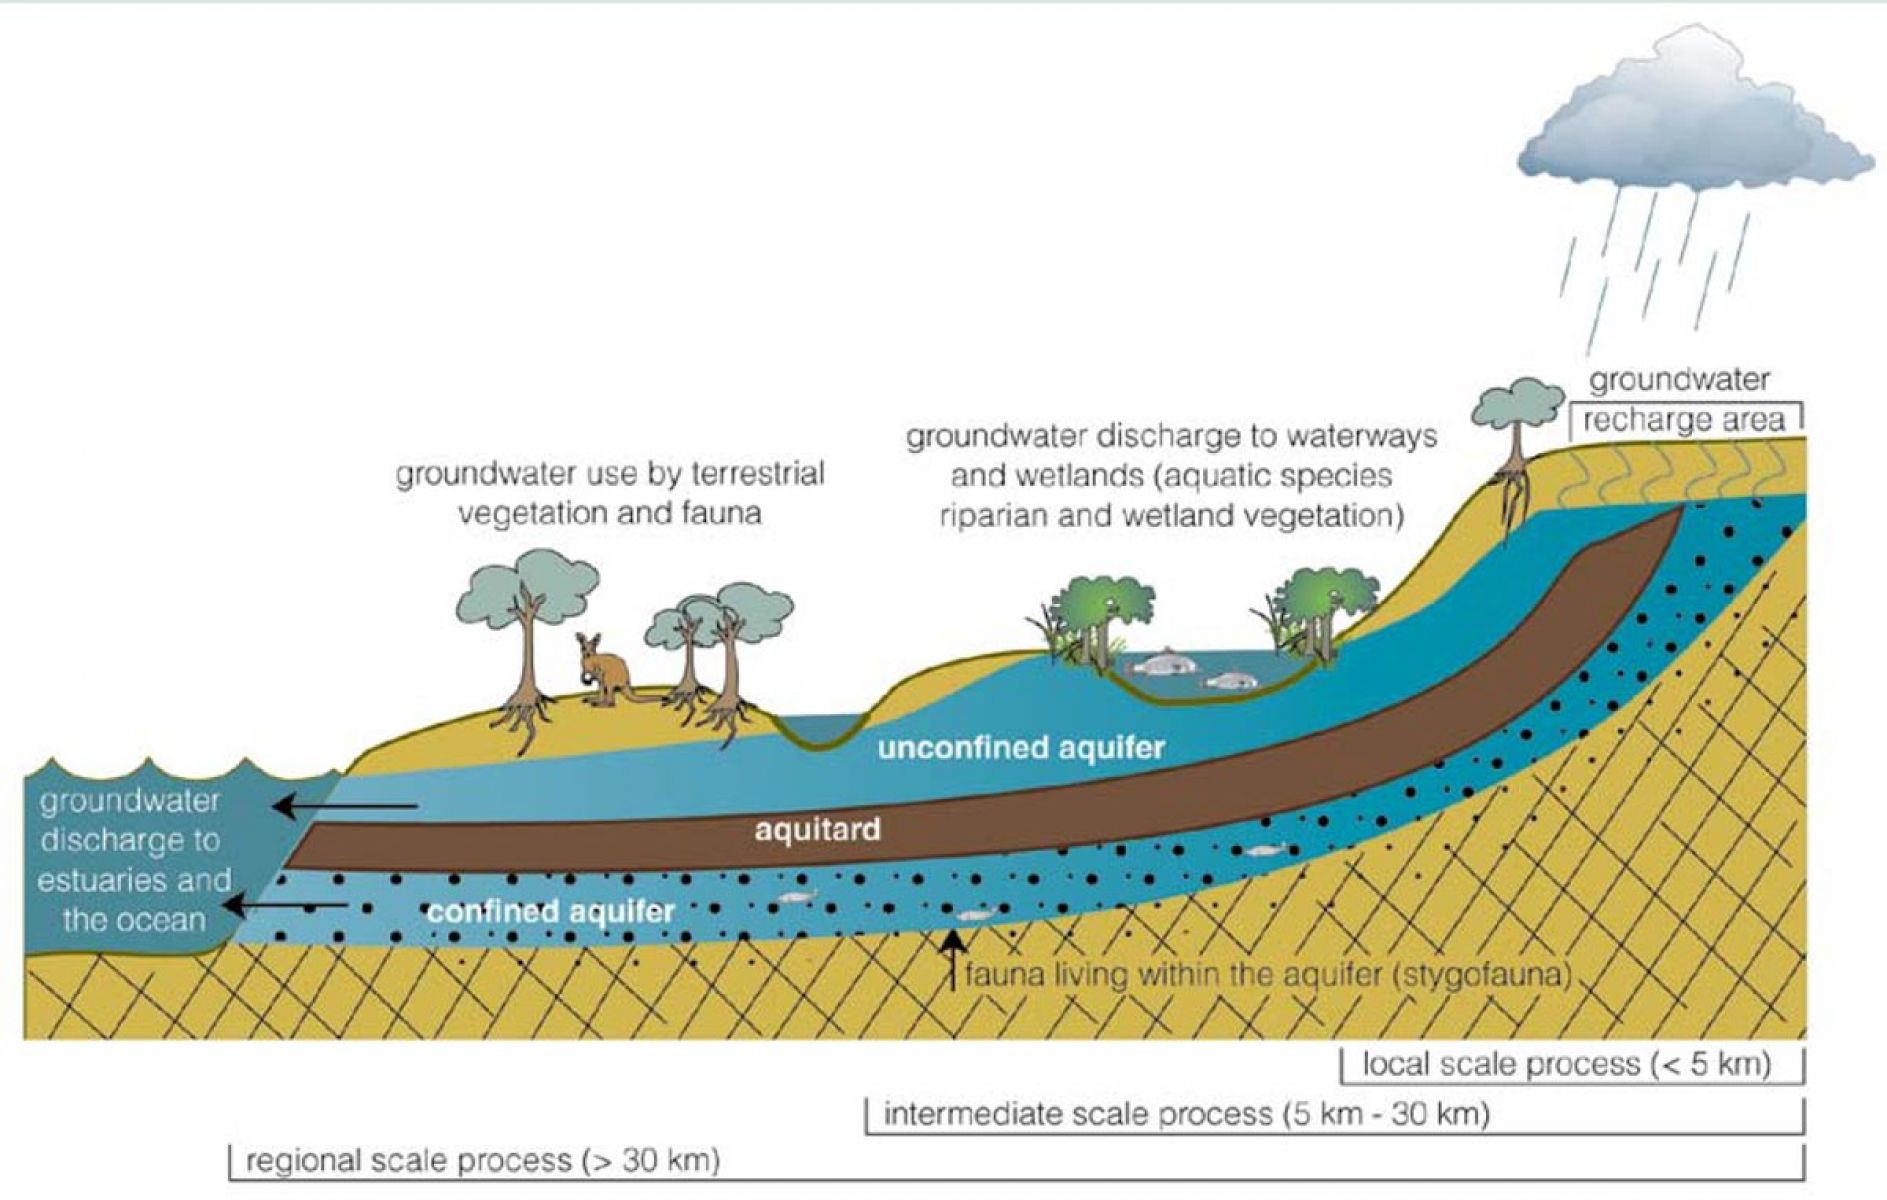 Diagram showing groundwater dependent ecosystems.  Groundwater recharge area, groundwater discharges to waterways and wetlands aquatic species riparian and wetland vegetation, groundwater use by terrestrial vegetation and fauna. Unconfined acquifer, aquitard, confined acquifer, unconfined aquifer all discharge groundwater to estuaries and the ocean Fauna living within the aquifer stygofauna.